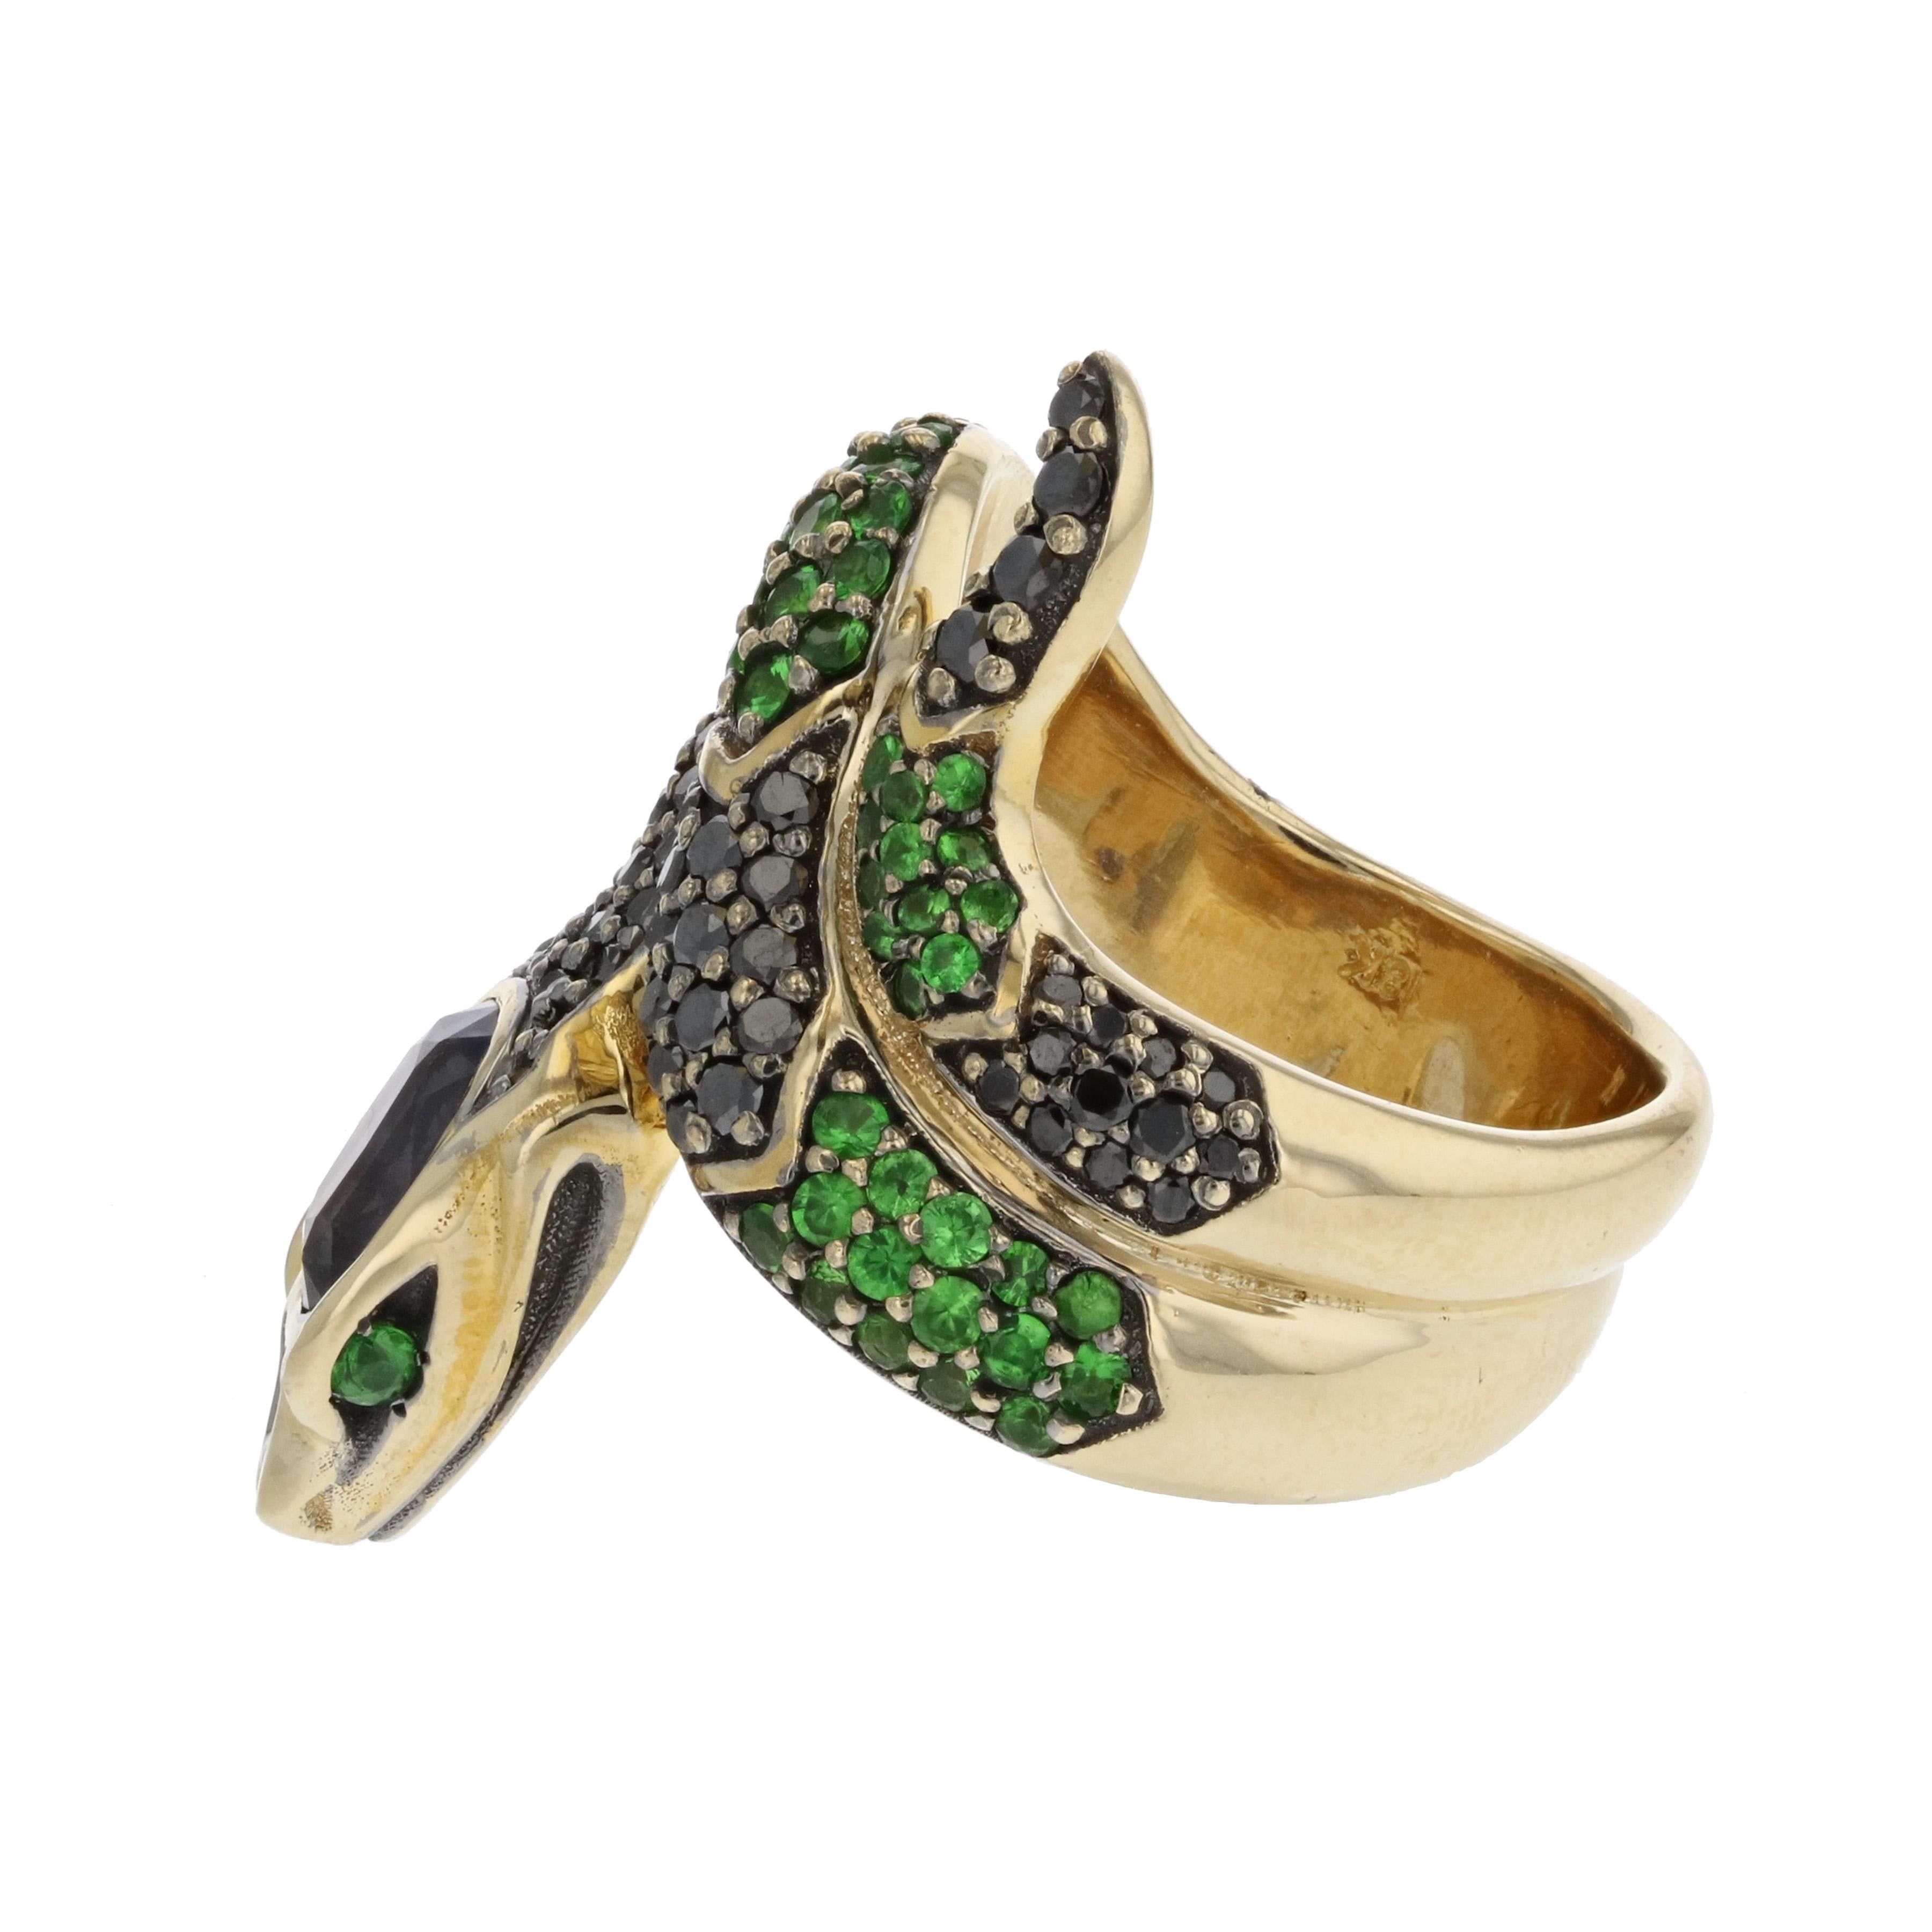 Snake ring composed of 18K yellow gold ring featuring a purple sapphire at the head, accented by tsavorite garnets and black diamonds.  The purple sapphire weighs 2.16 carats and is accompanied by a gemological report from Universal Gemological